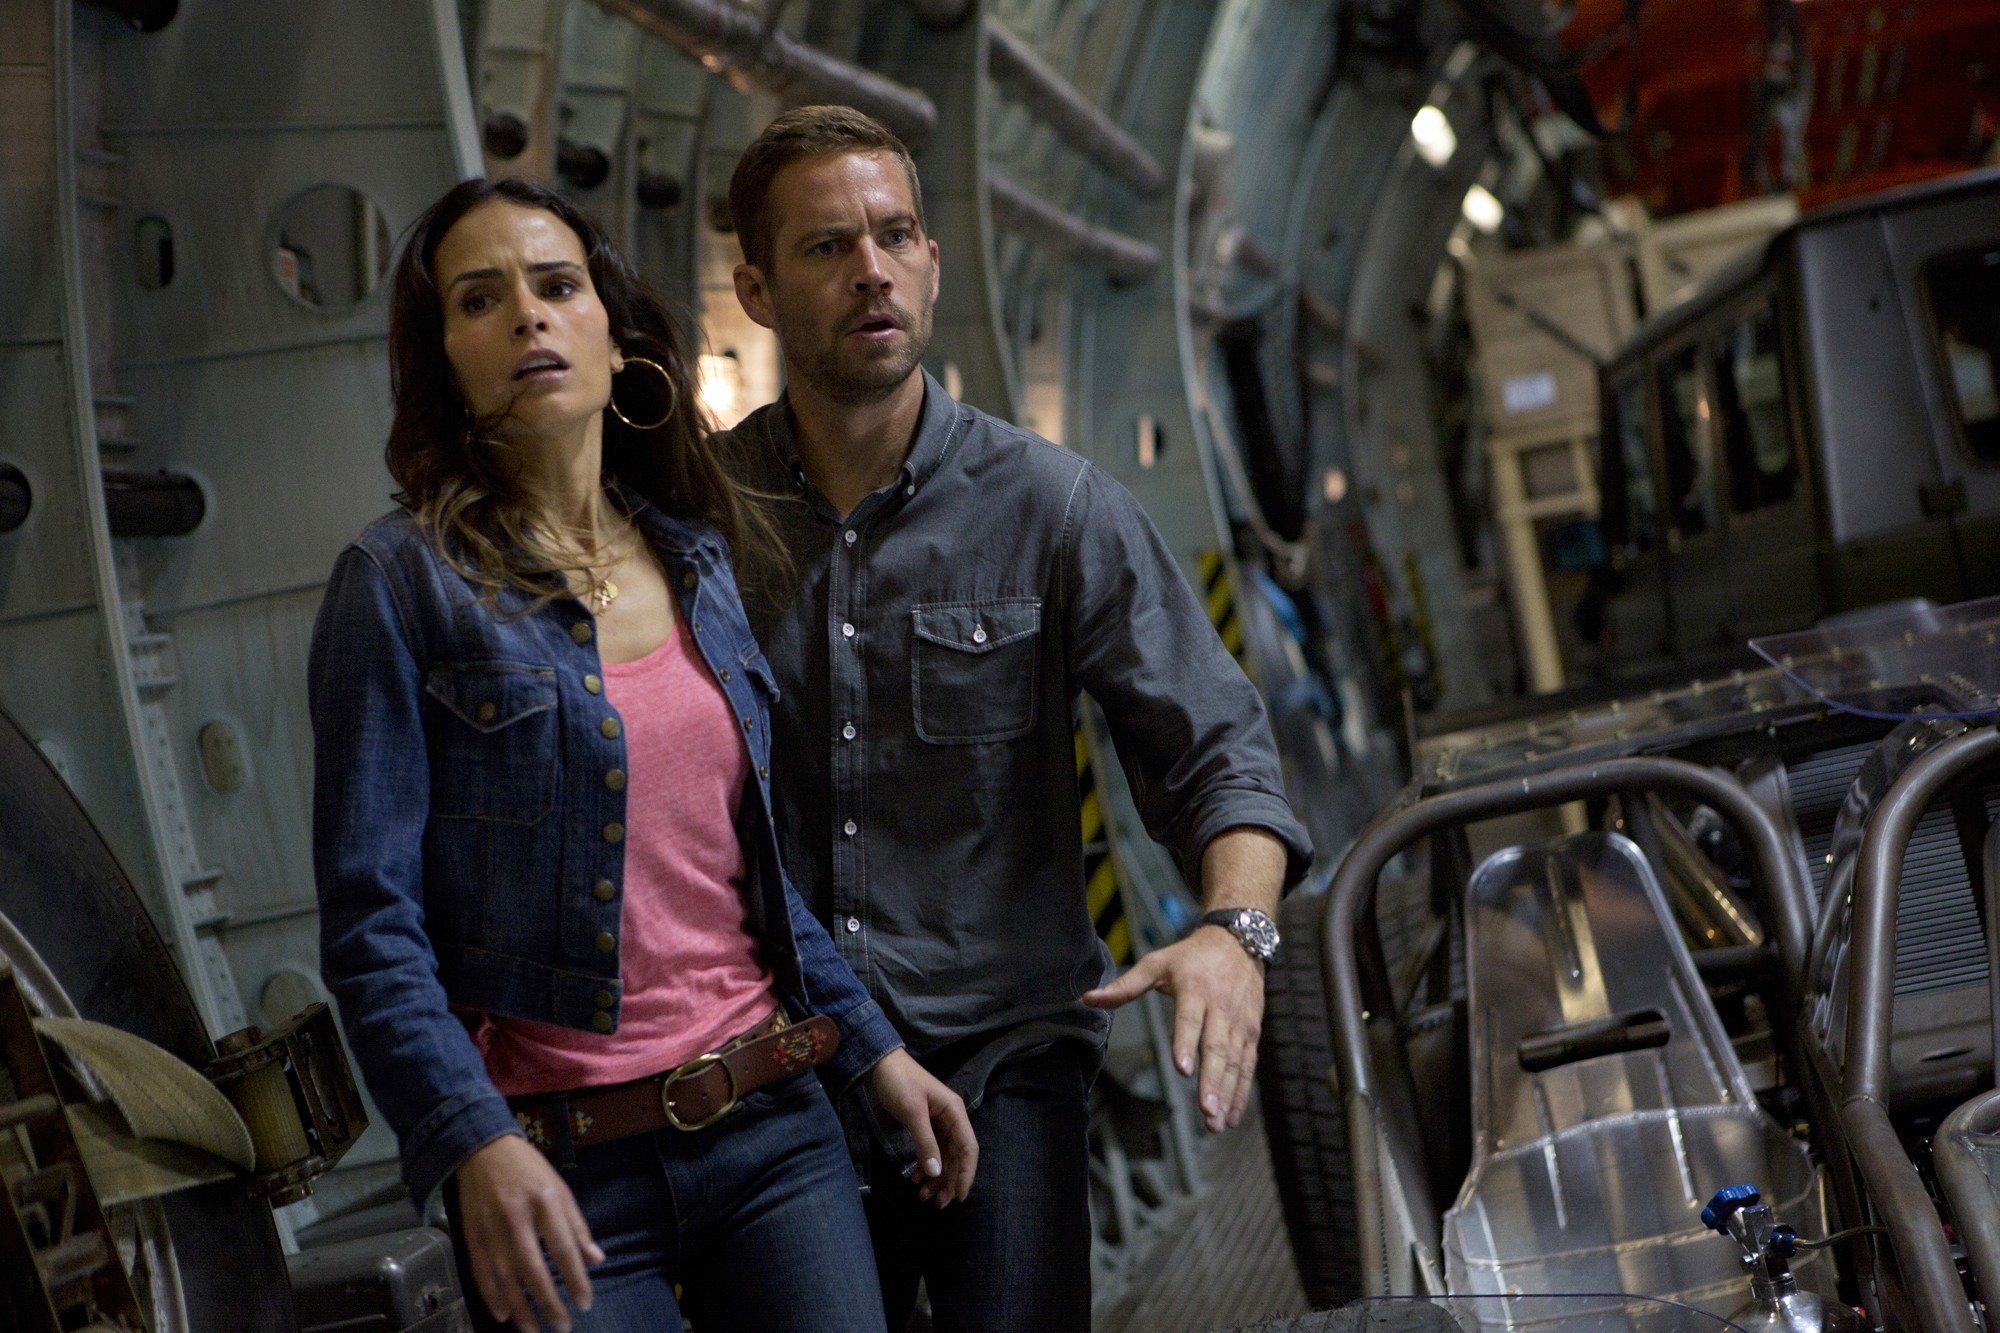 Jordana Brewster stars as Mia Toretto and Paul Walker stars as Brian O'Conner in Universal Pictures' Fast and Furious 6 (2013)